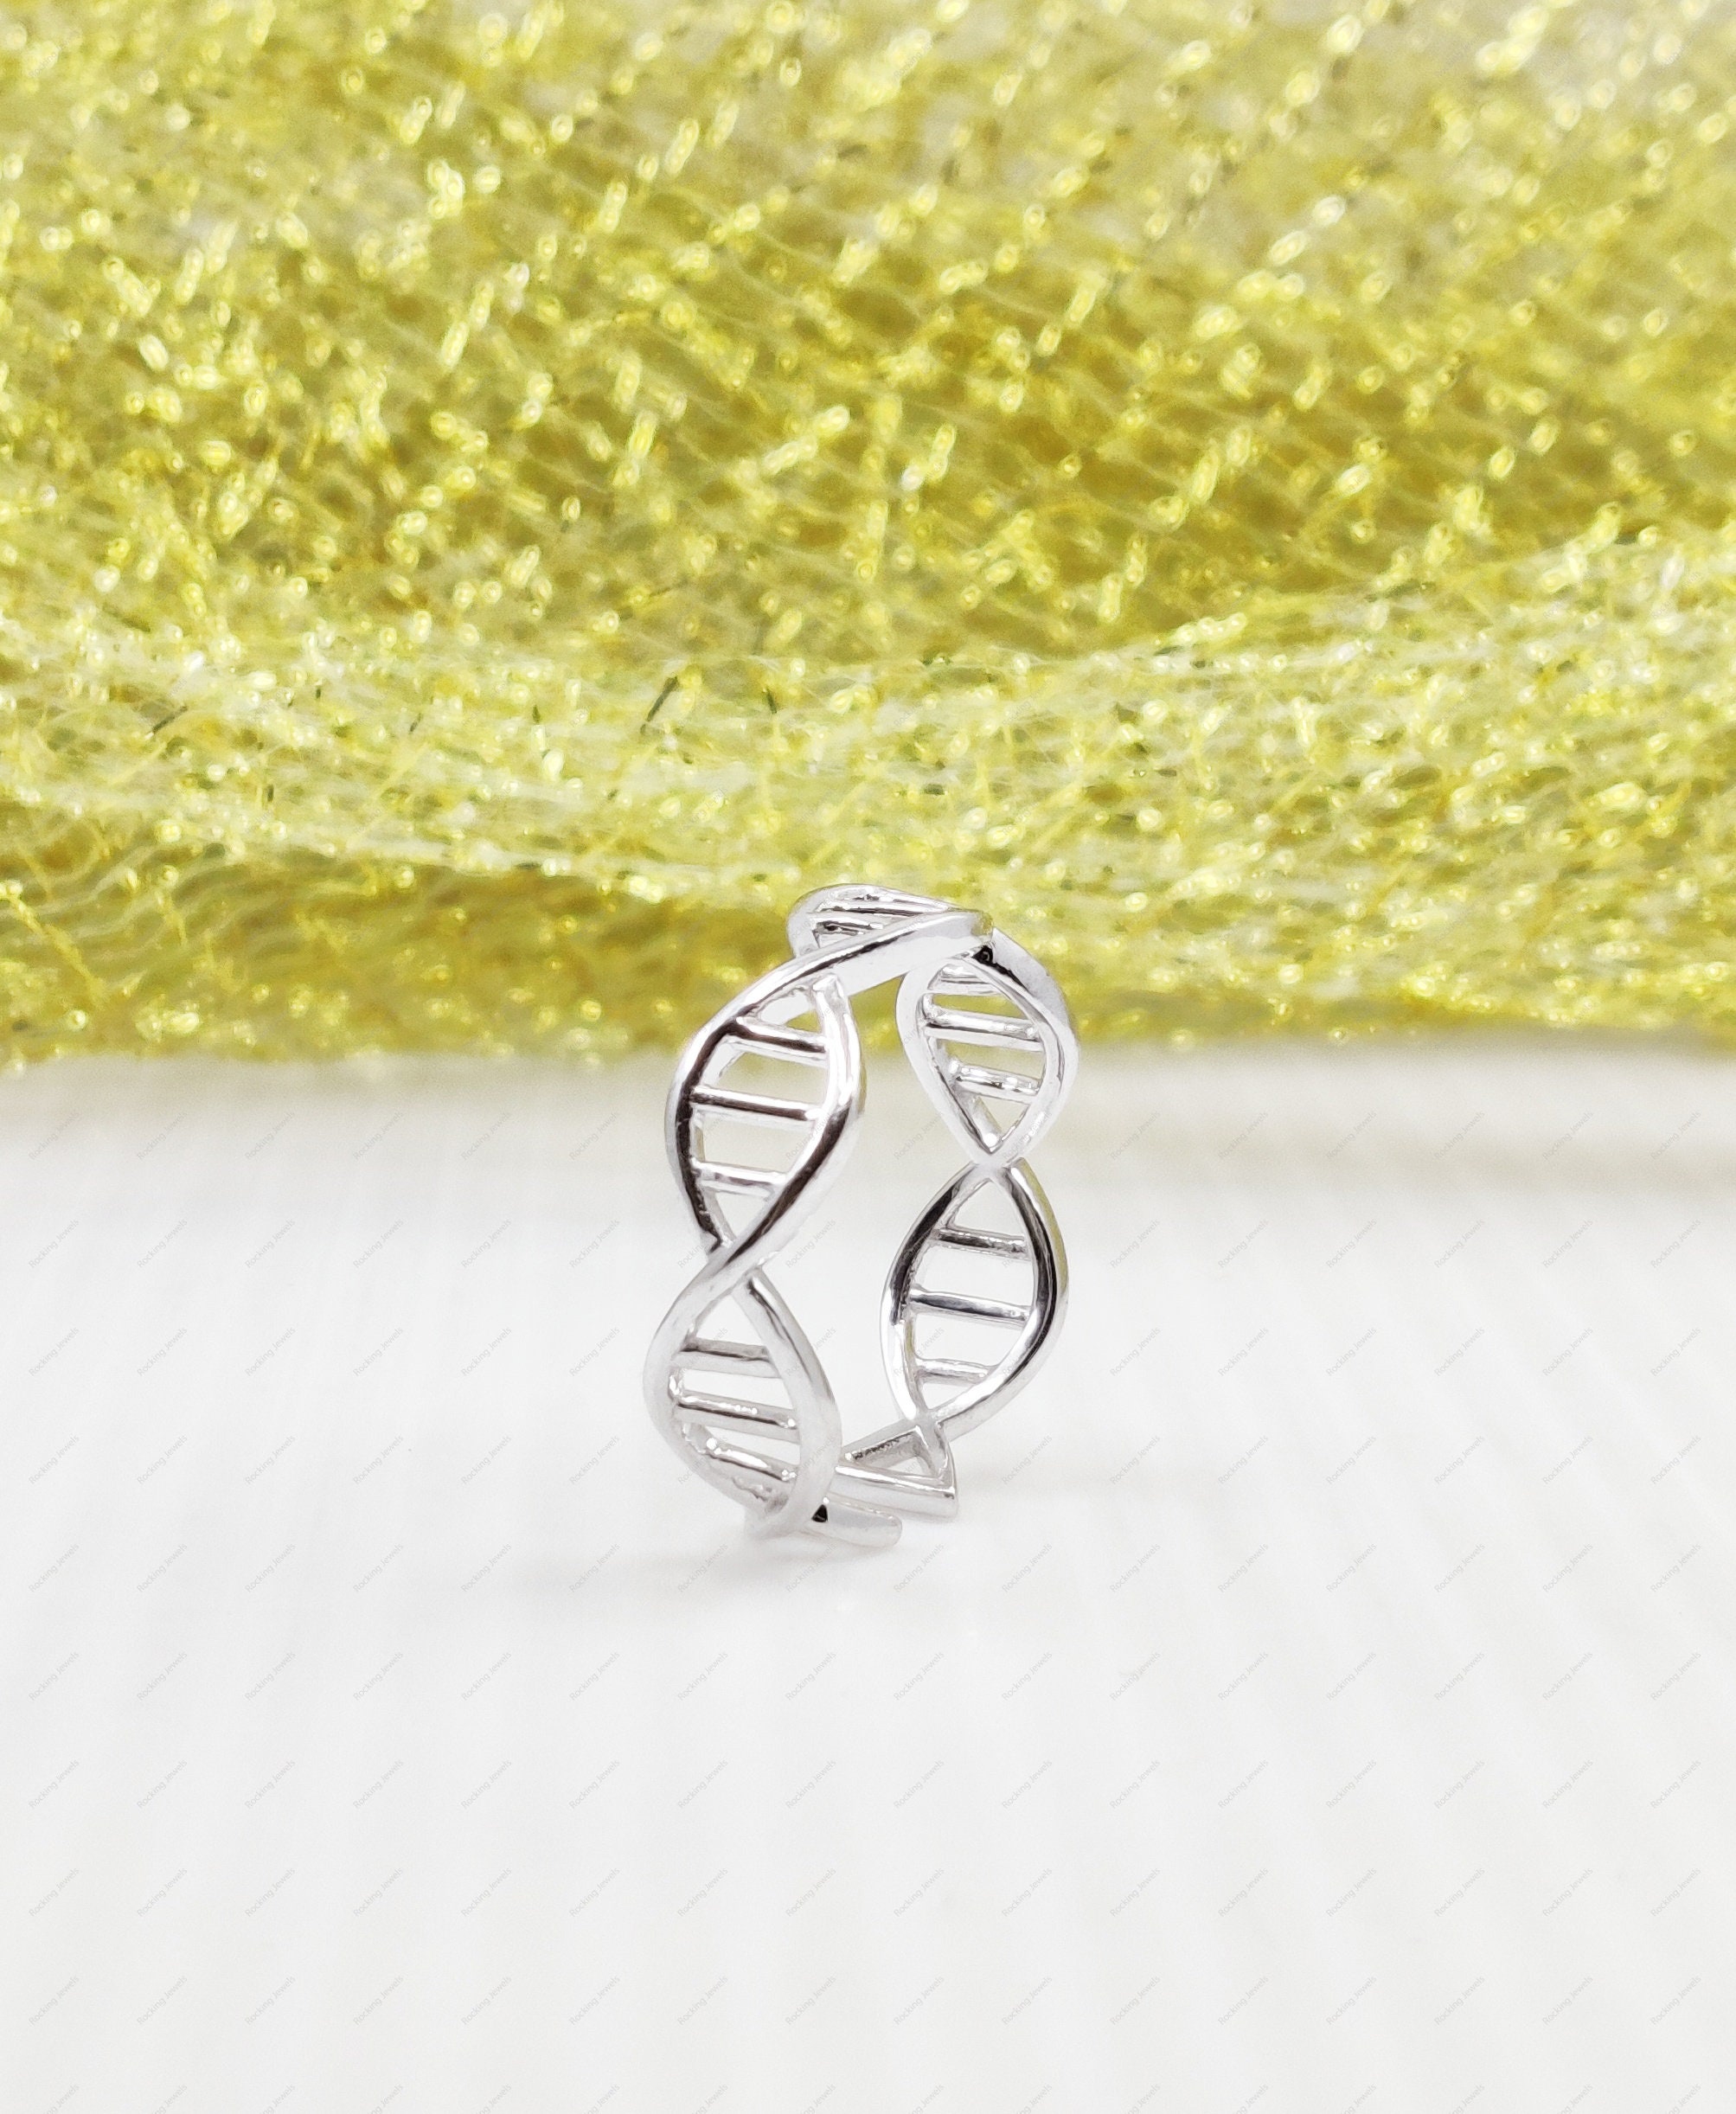 Buy 14K White Gold Double Helix DNA Structure Ring, Science Jewelry,  Biology Student Gift, Twisted Wedding Ring, Graduation Gift Online in India  - Etsy